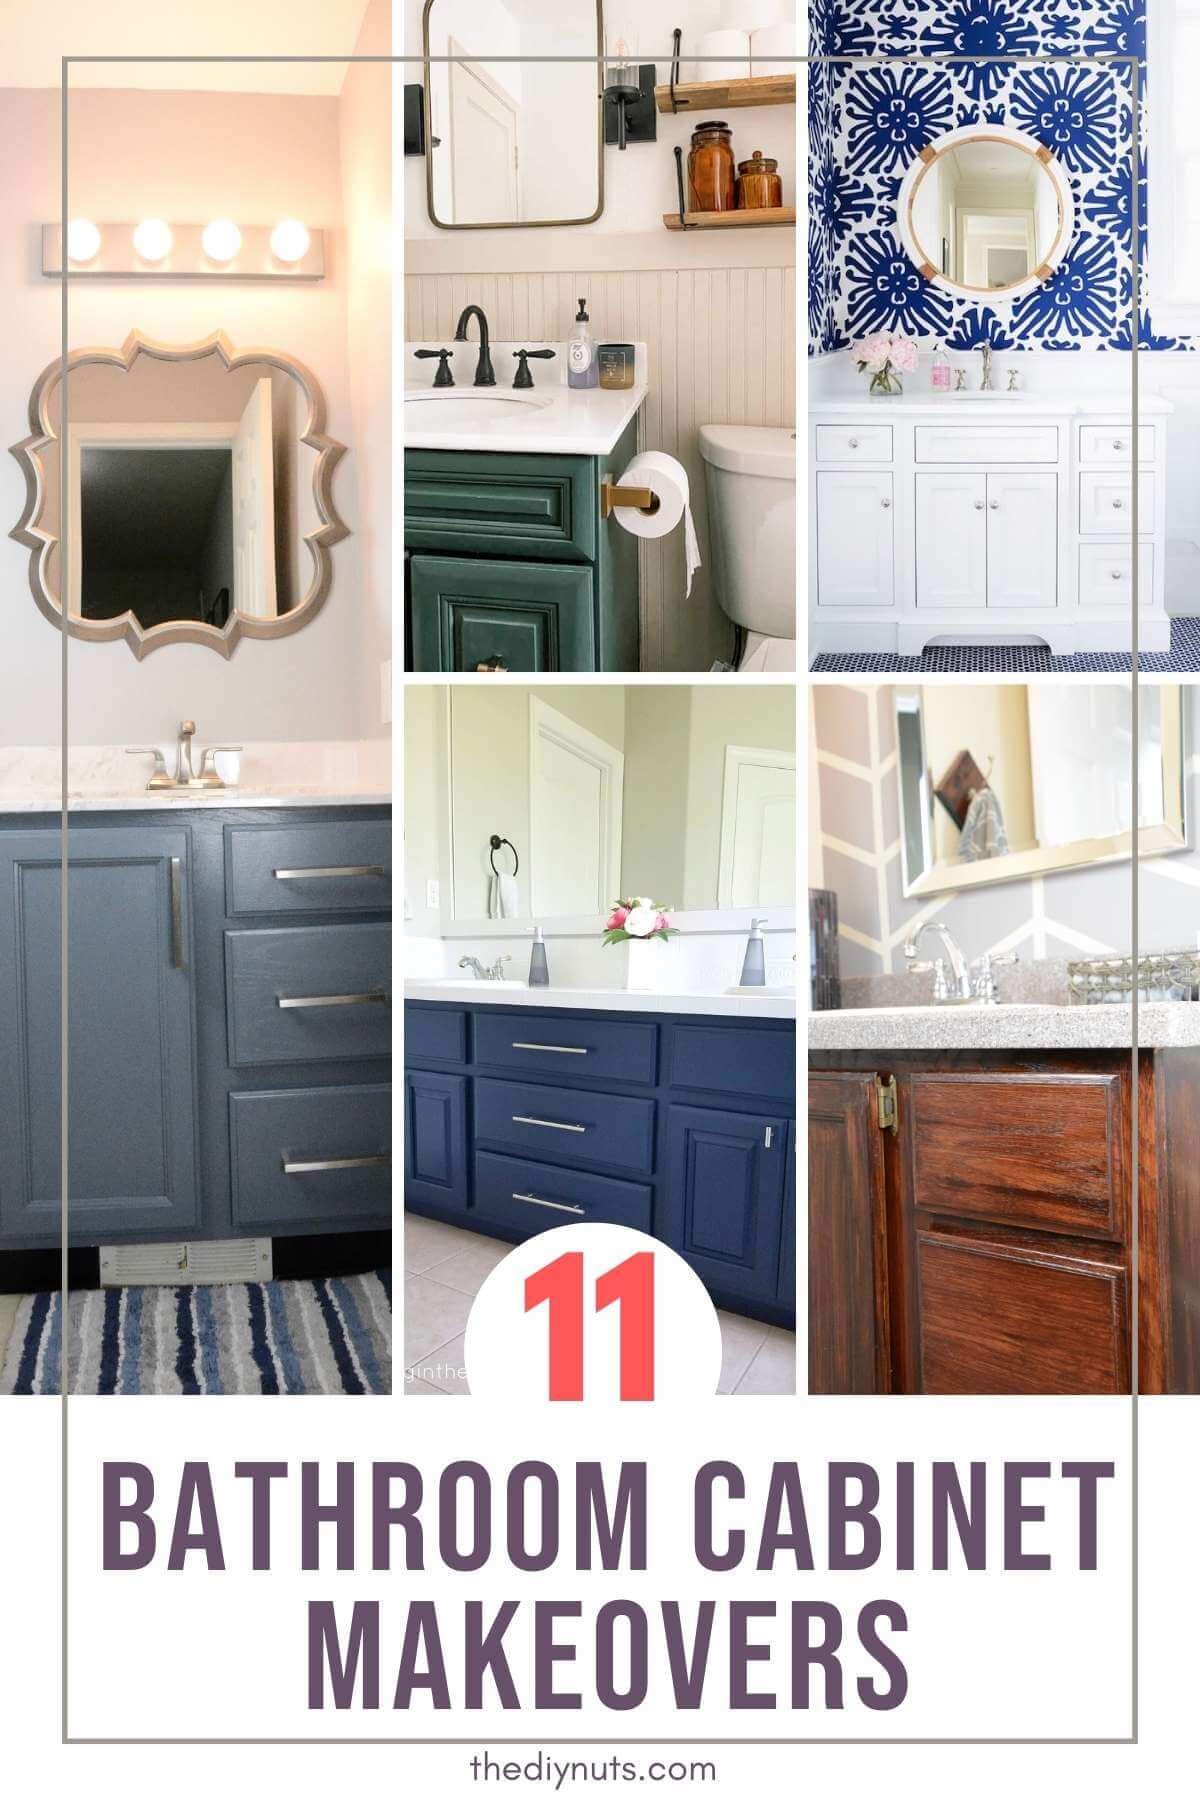 Bathroom cabinet makeovers with 6 different images of painted bathroom cabinets.